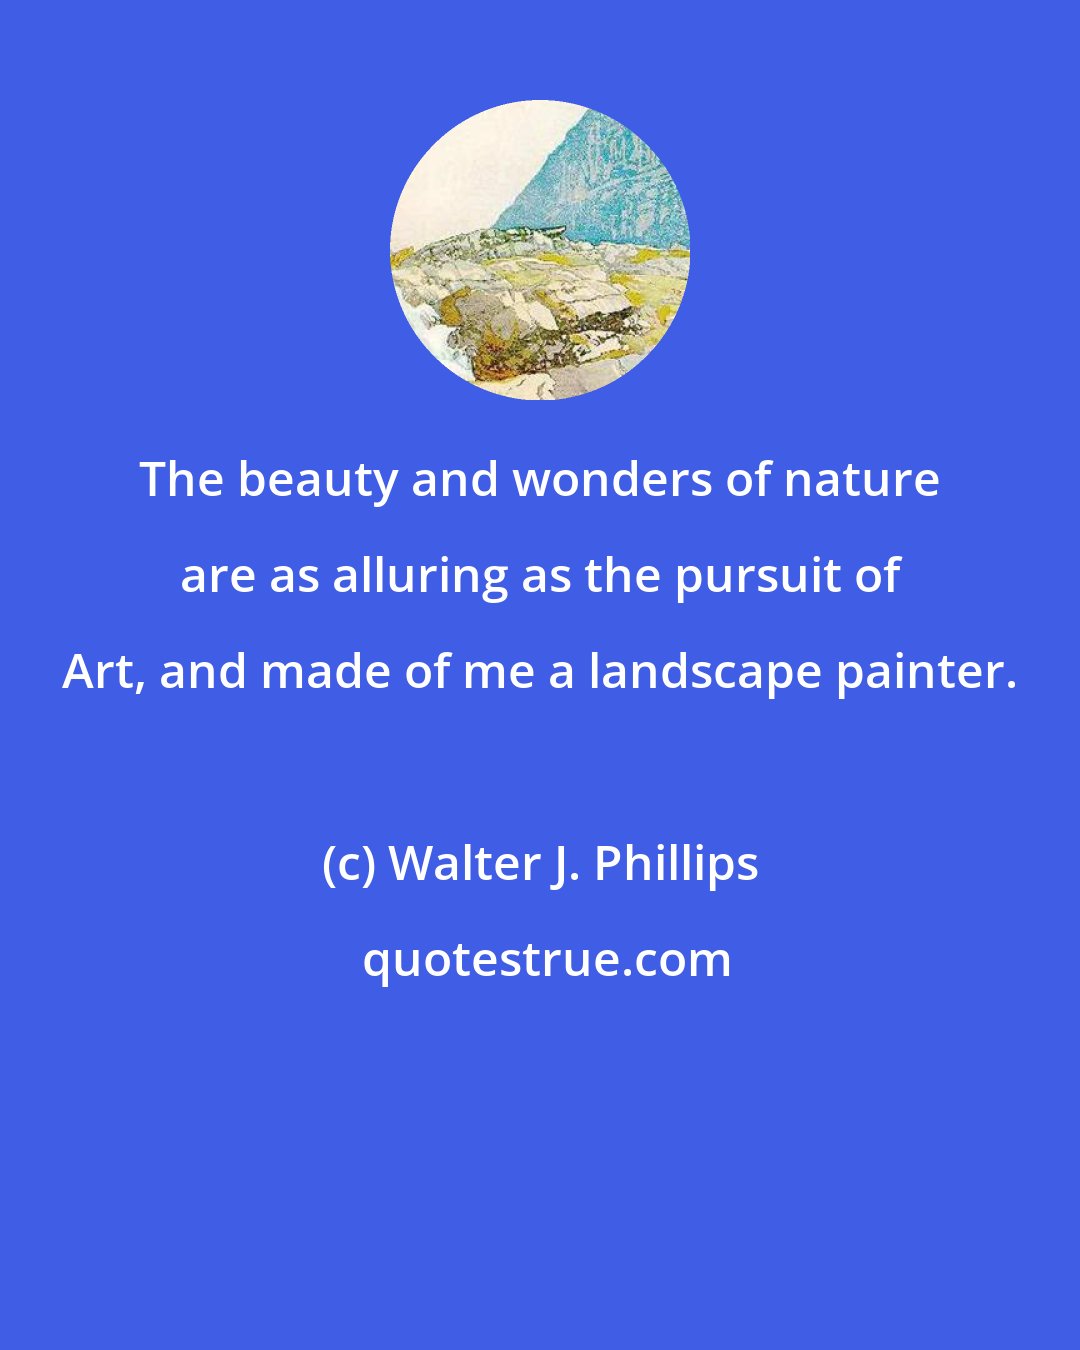 Walter J. Phillips: The beauty and wonders of nature are as alluring as the pursuit of Art, and made of me a landscape painter.